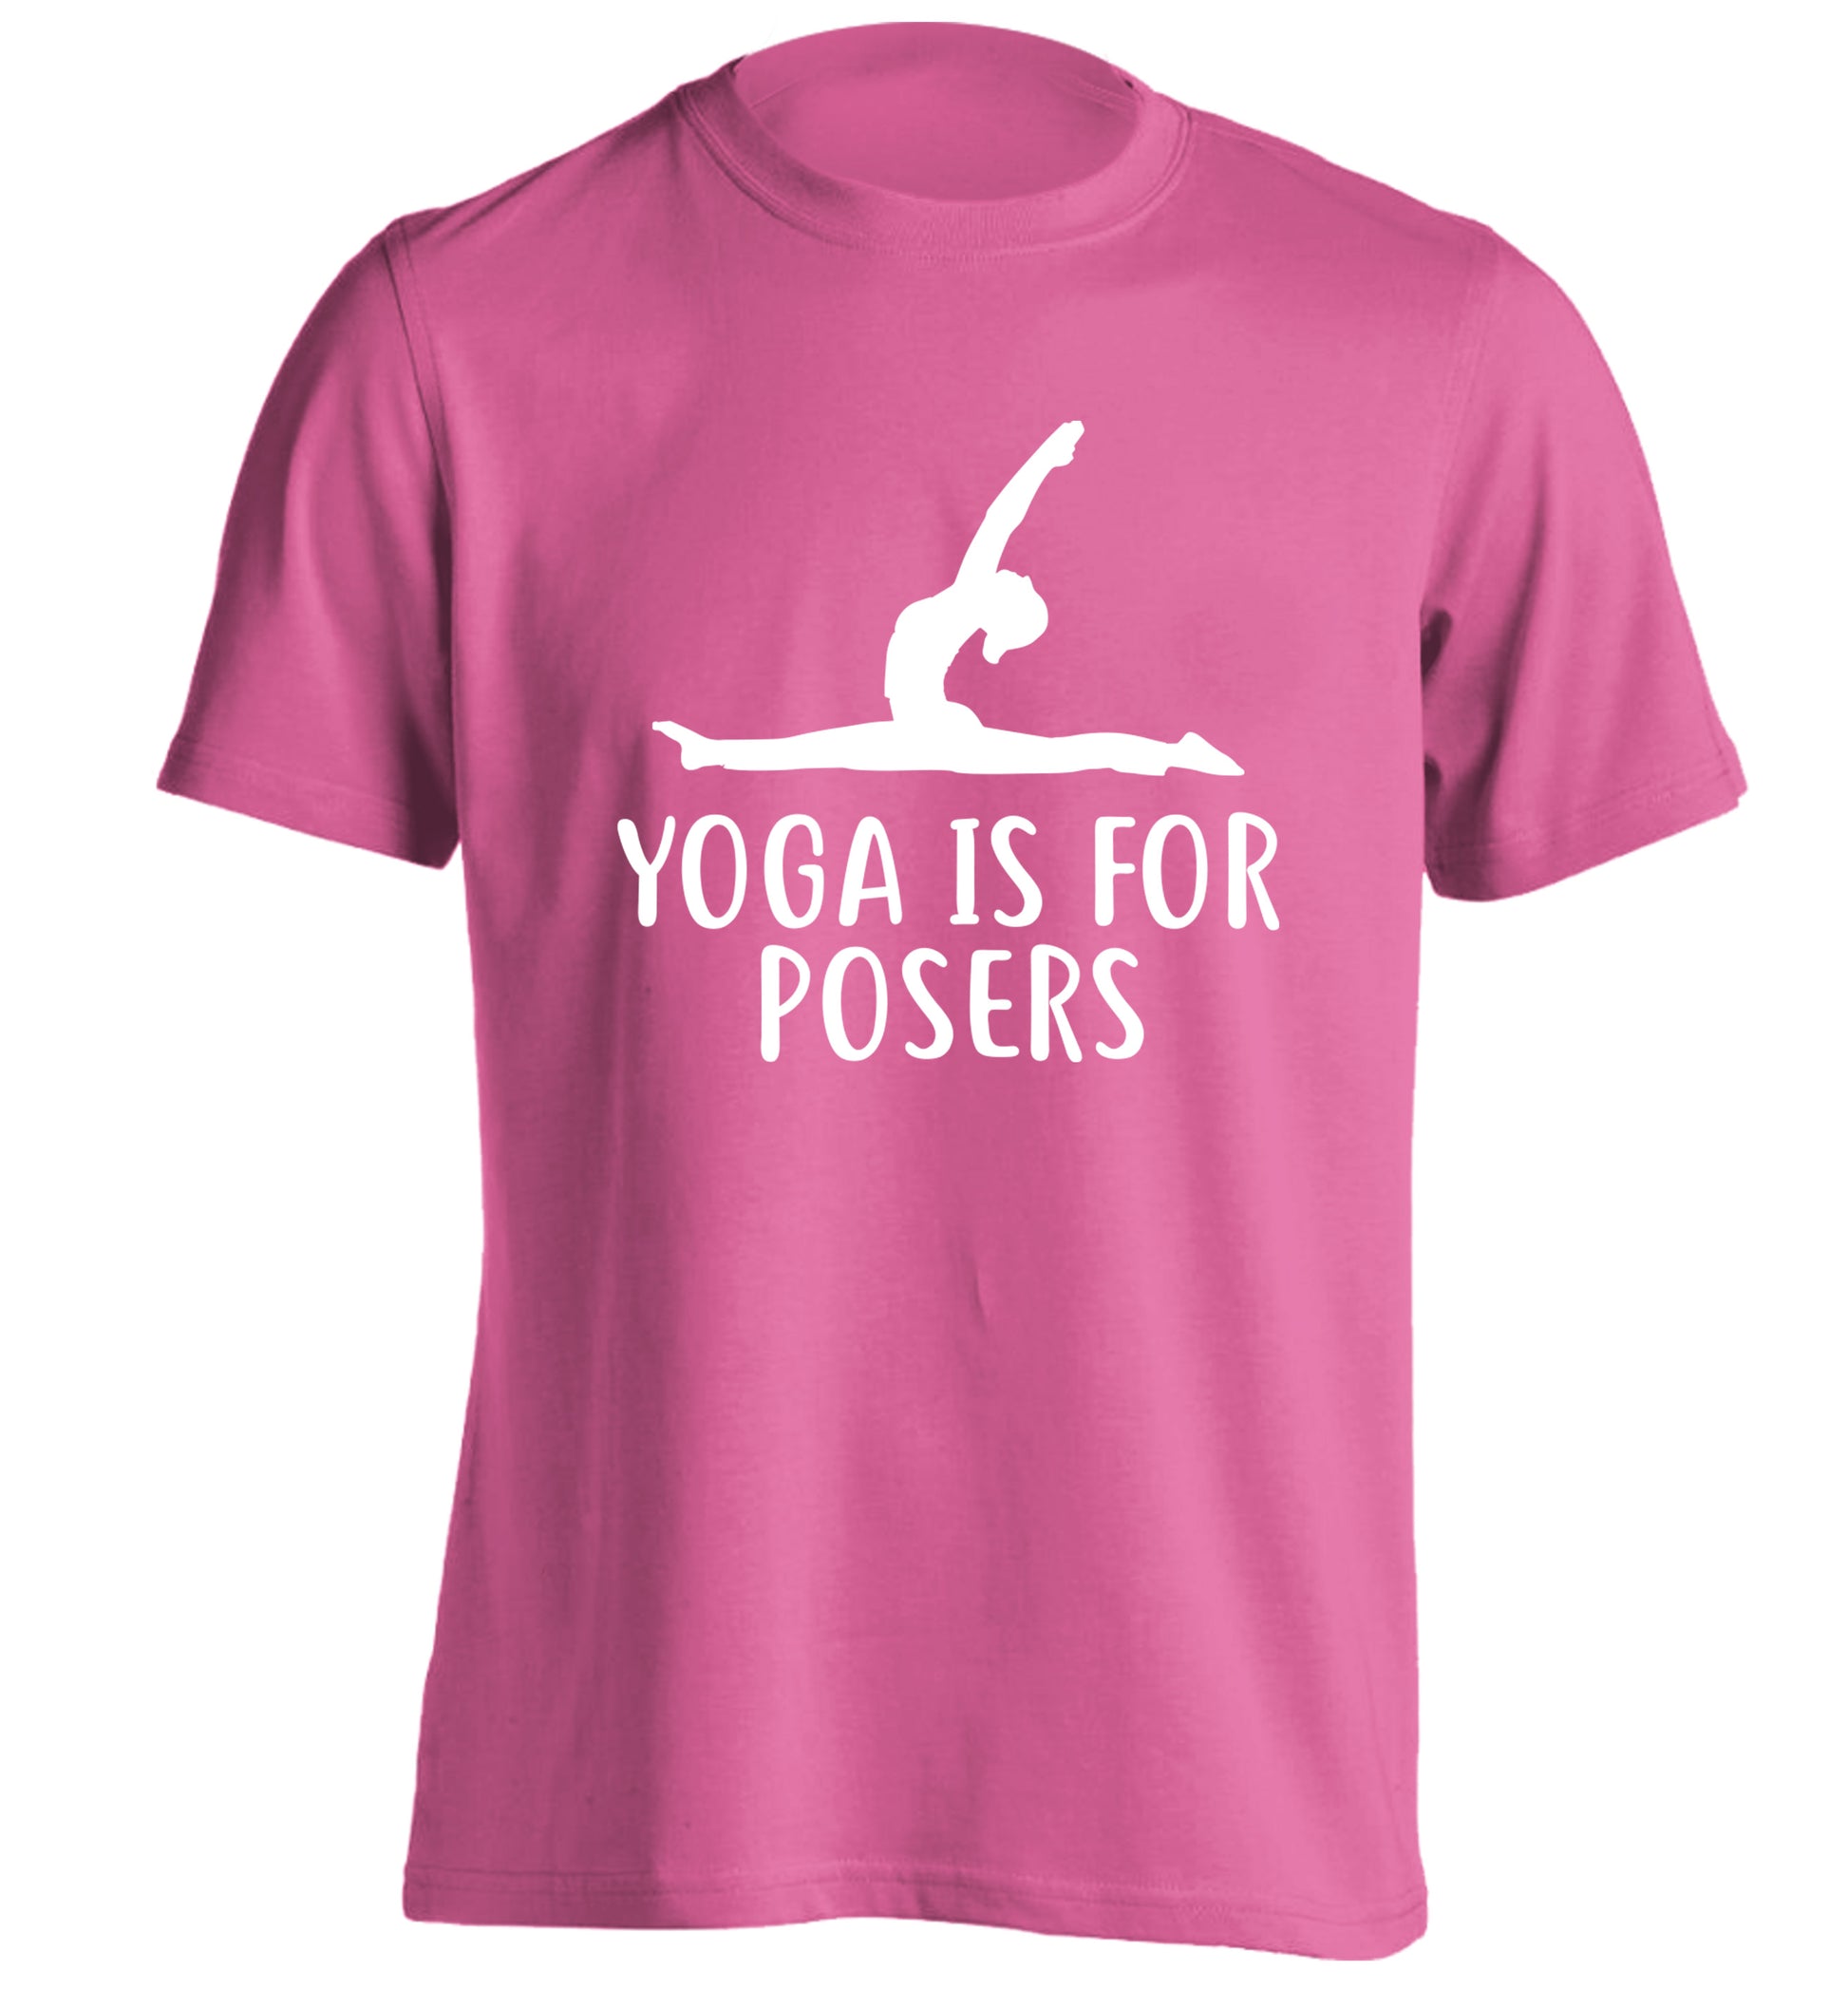 Yoga is for posers adults unisex pink Tshirt 2XL